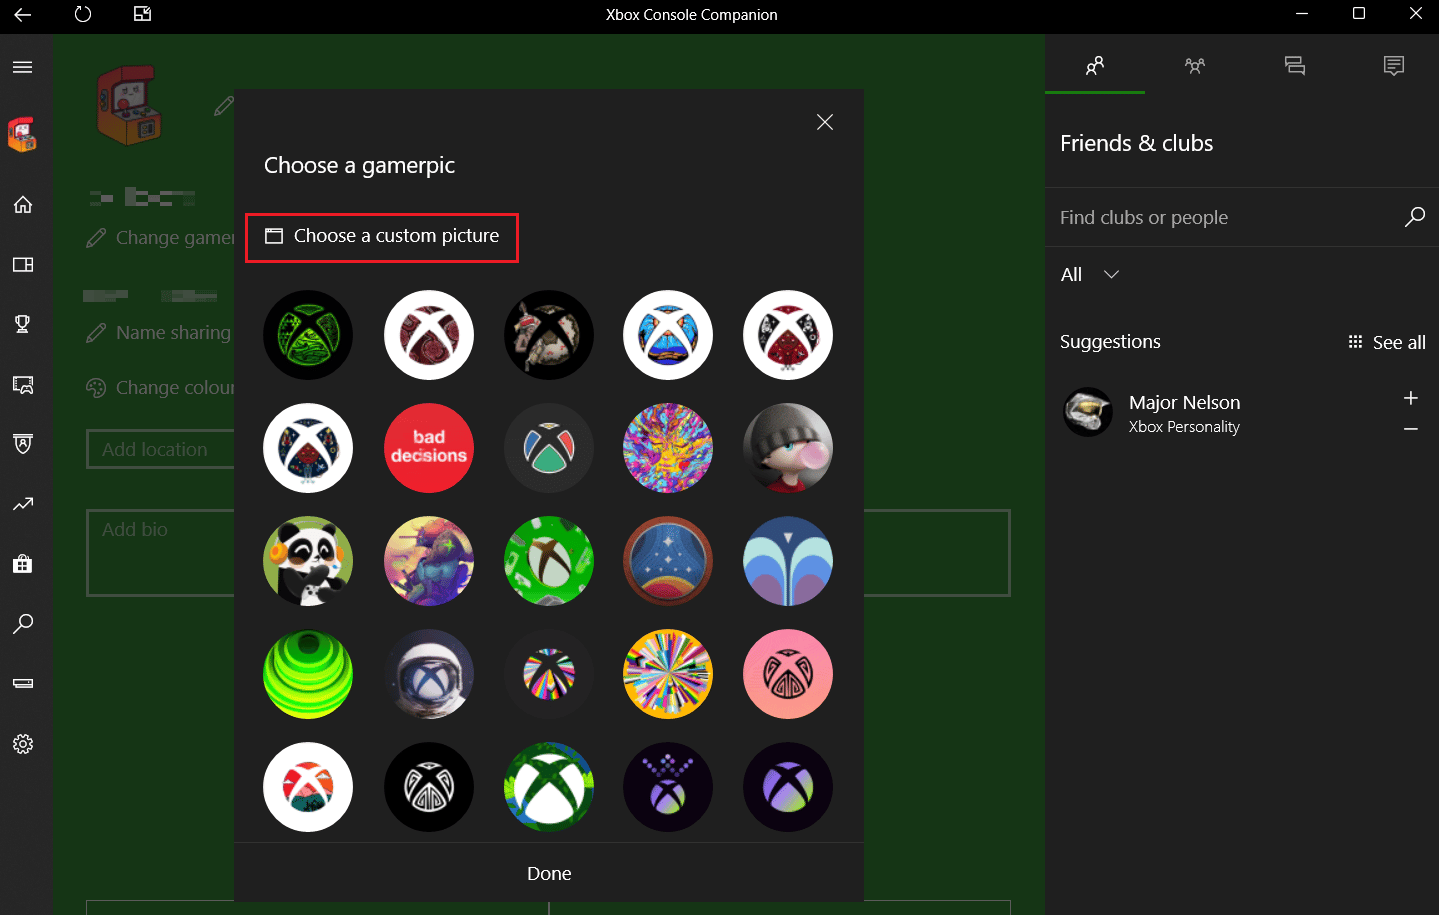 How to Change Profile Picture on Xbox App?